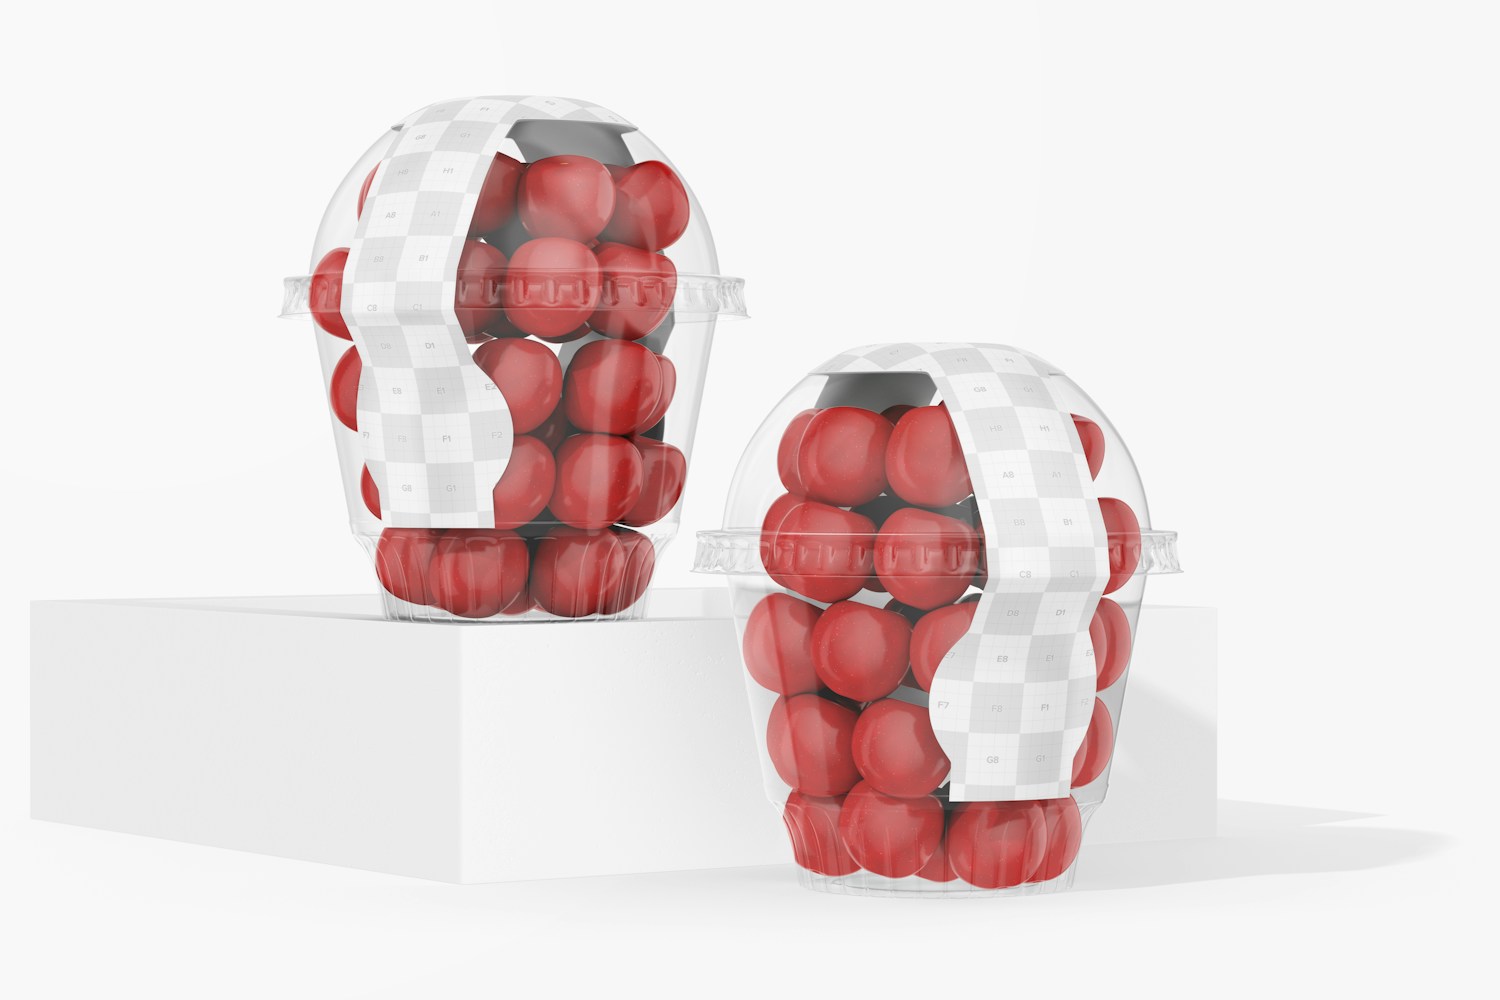 Small Fruit Containers With Lid Mockup